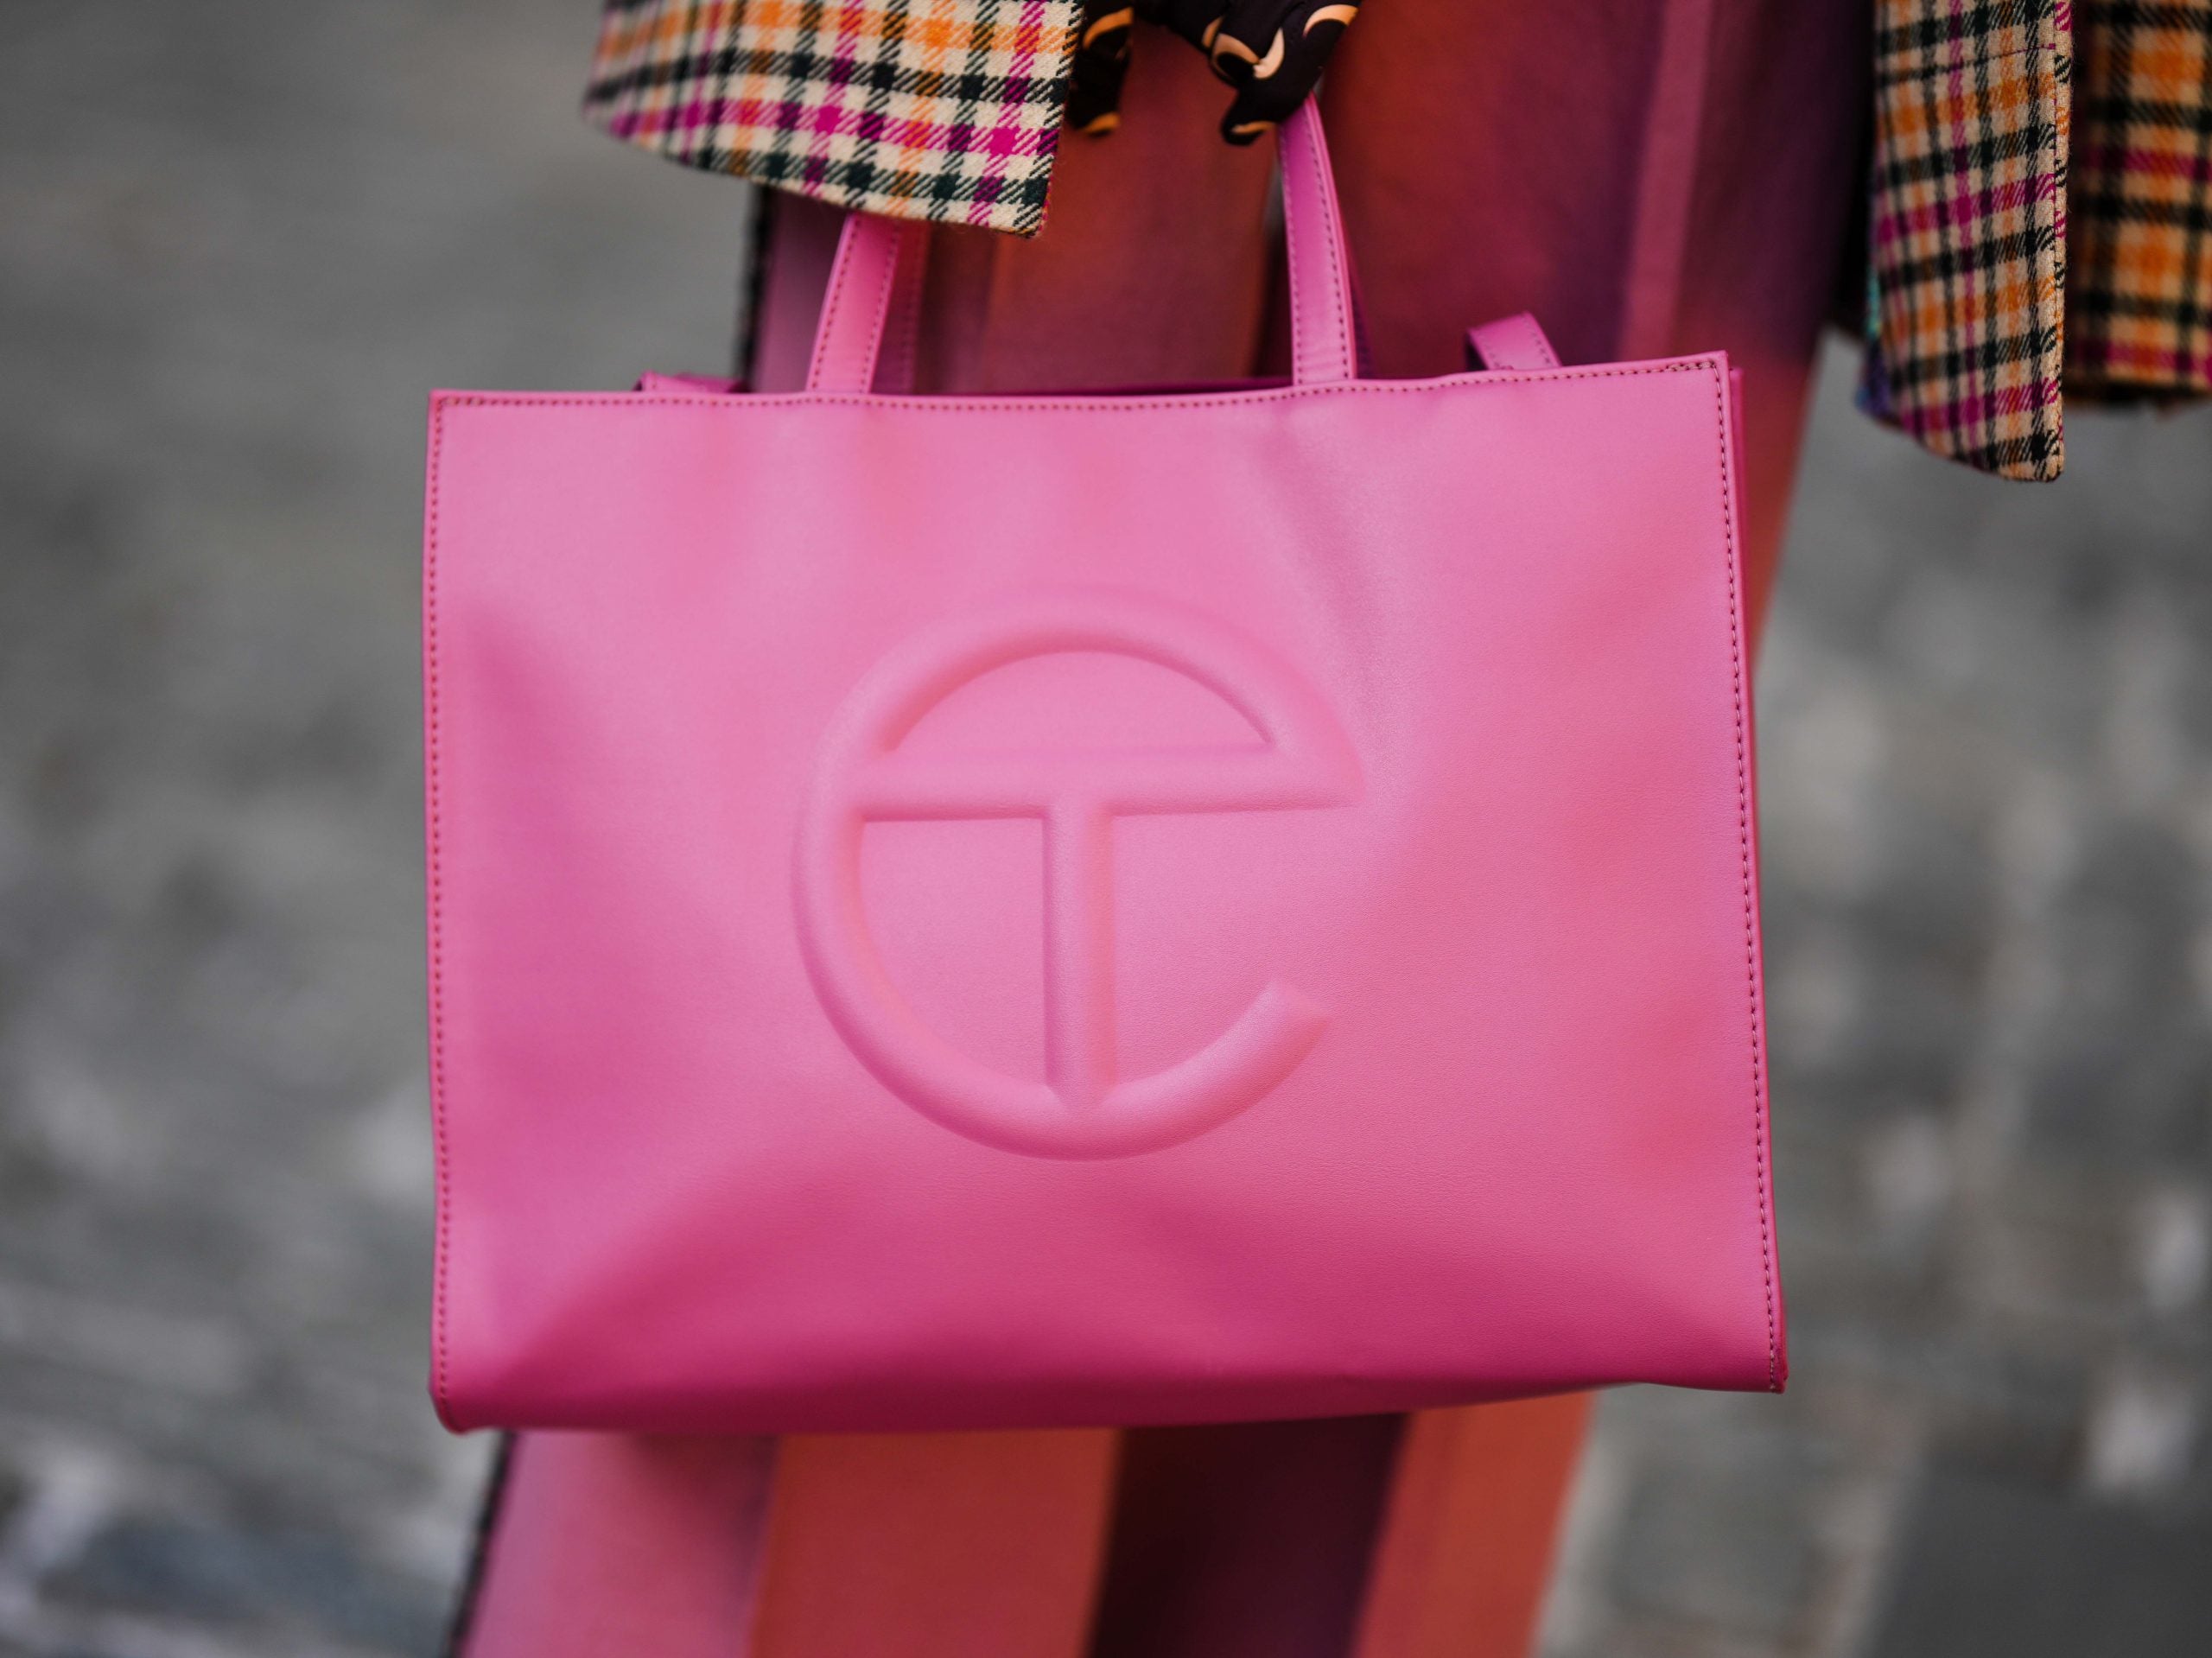 How Telfar Changed Fashion With Just One Bag